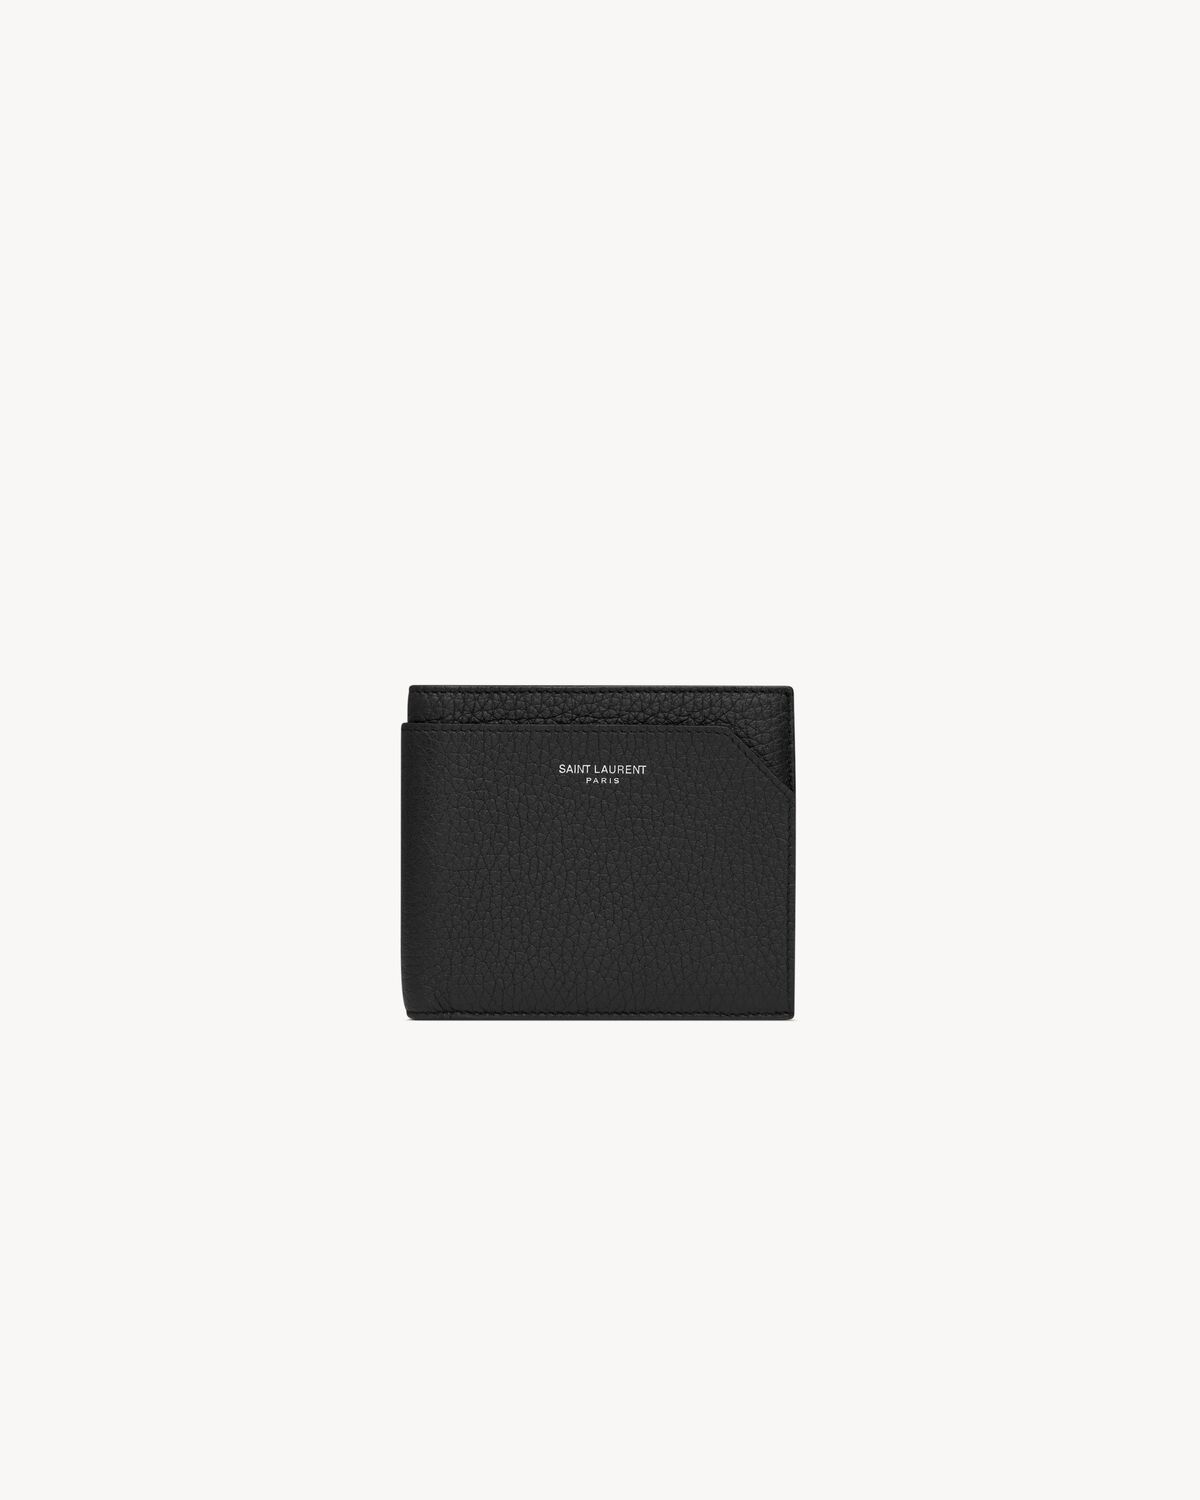 Saint Laurent Paris EAST/WEST wallet with coin purse in grained leather